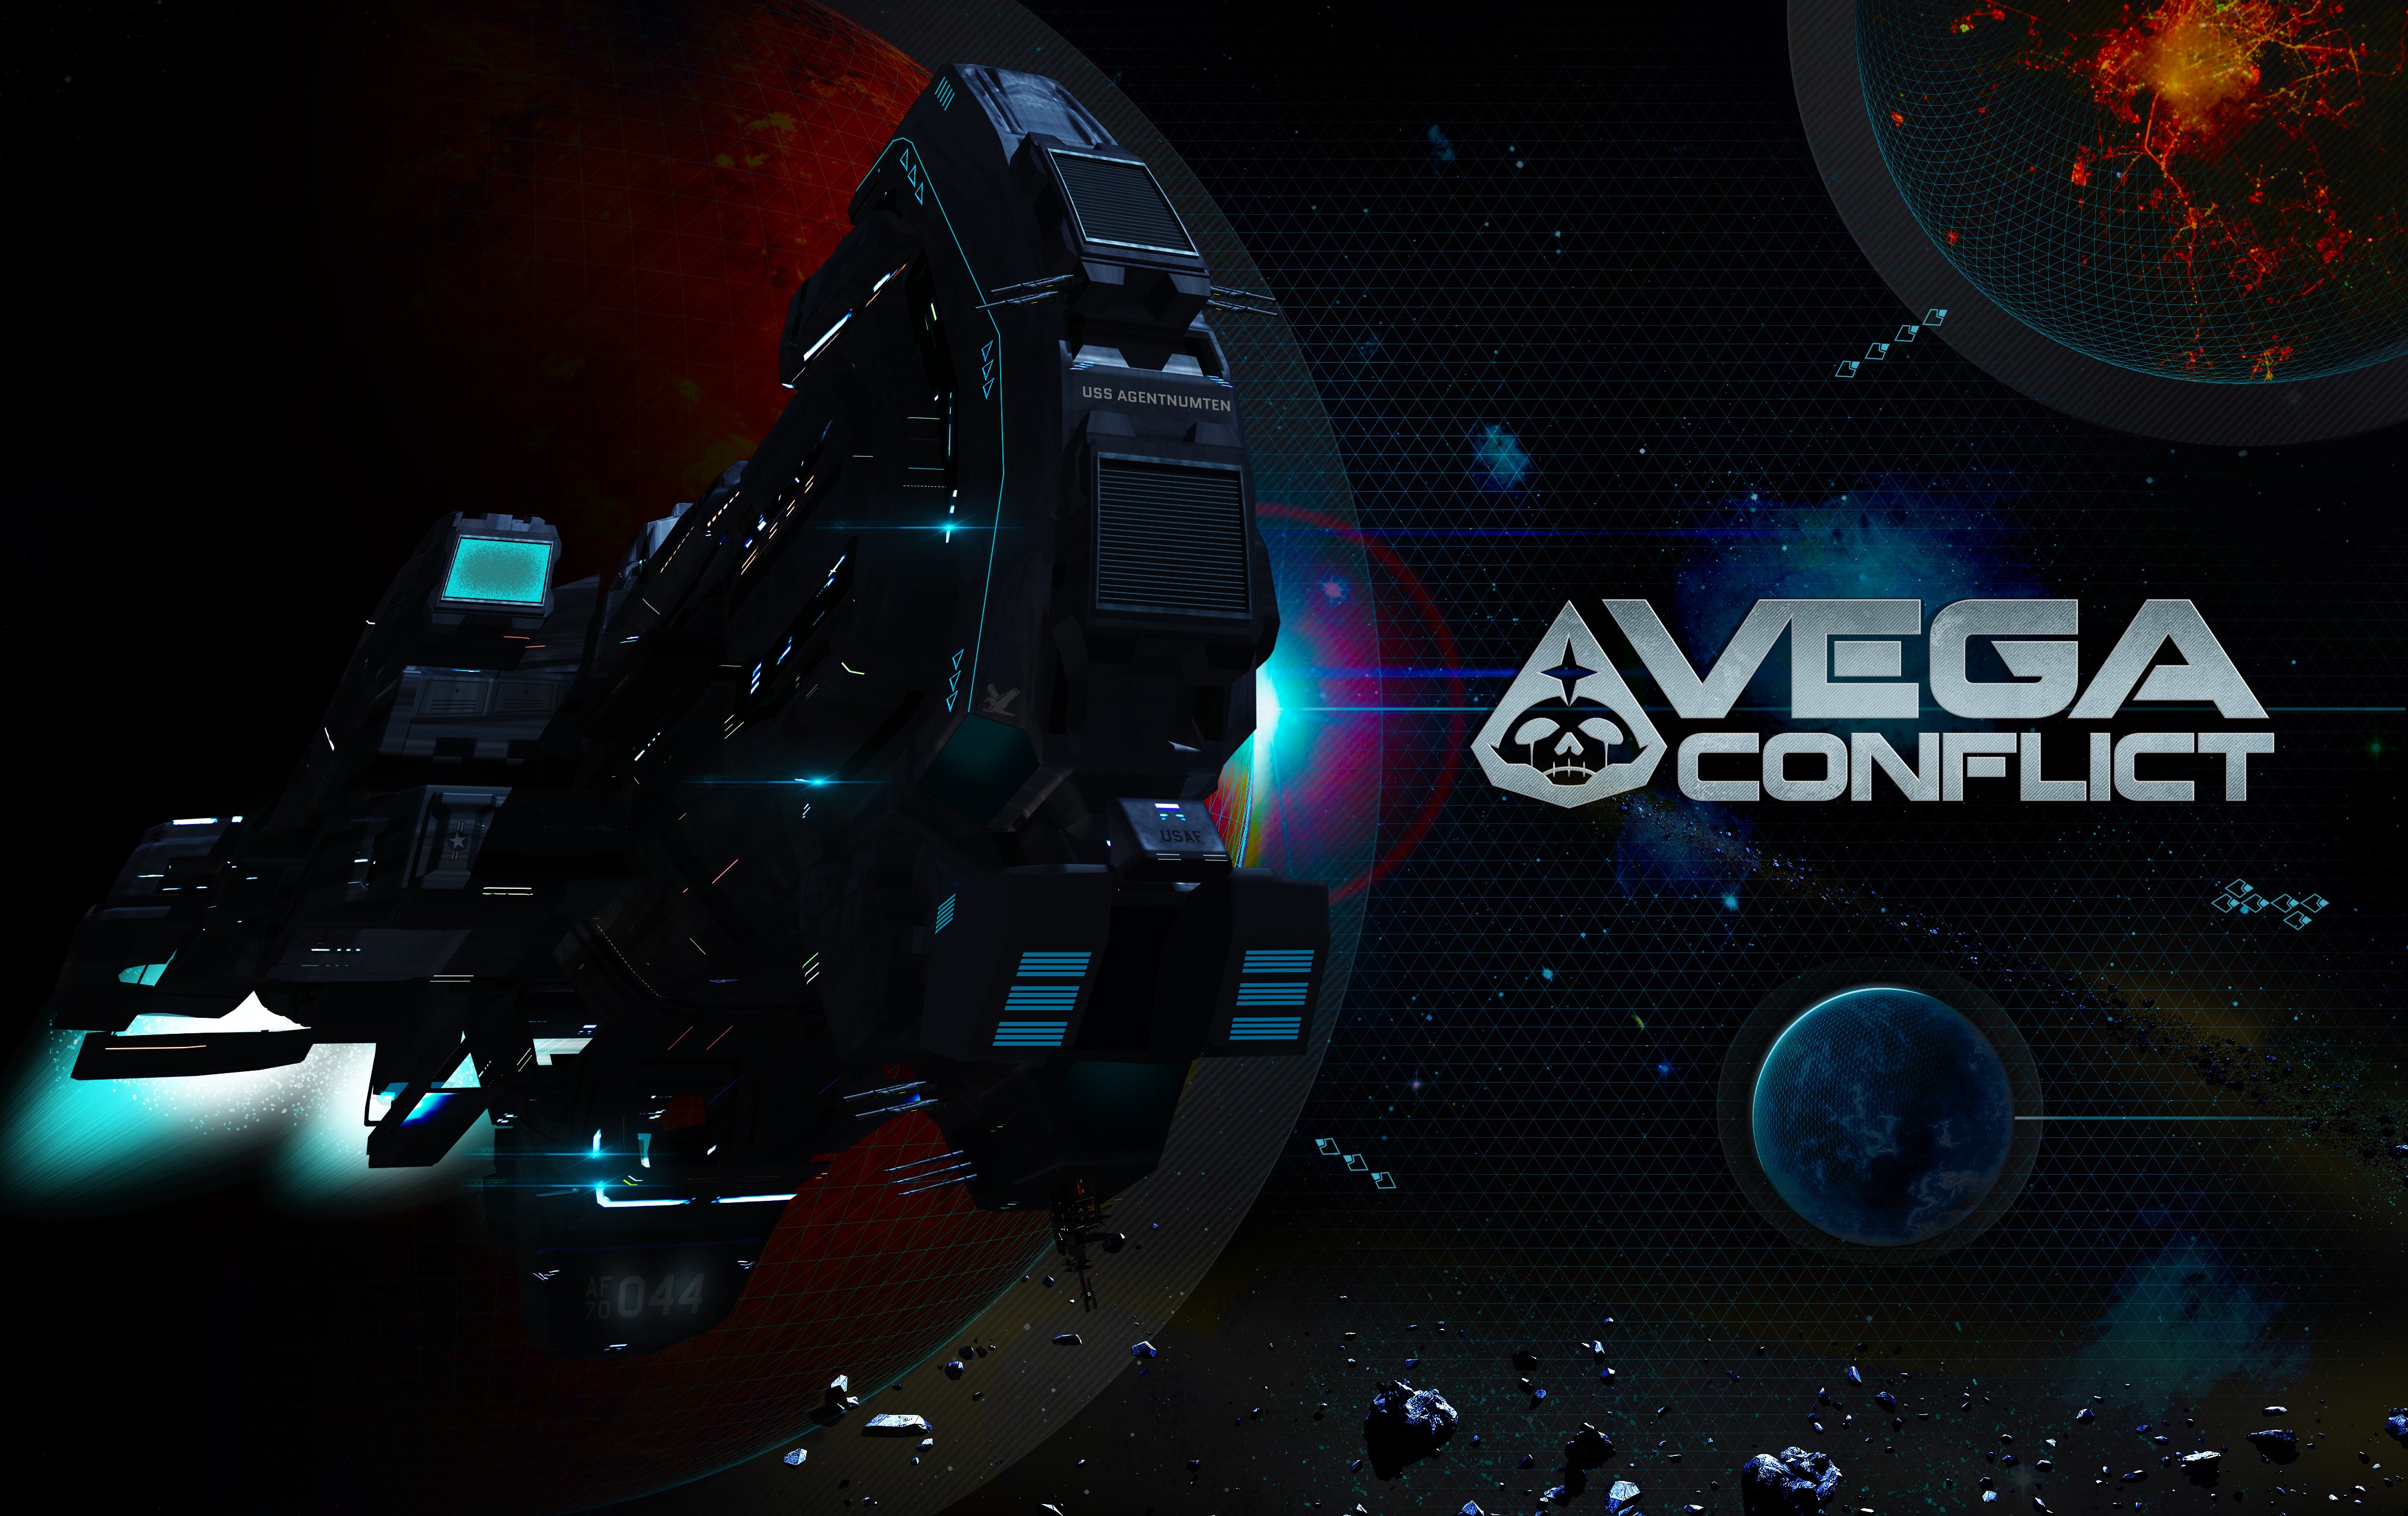 vega, Conflict, Sci fi, Action, Fighting, Futuristic, Space, Spaceship, Mmo, Online, Rpg, 1vegac, Poster Wallpaper